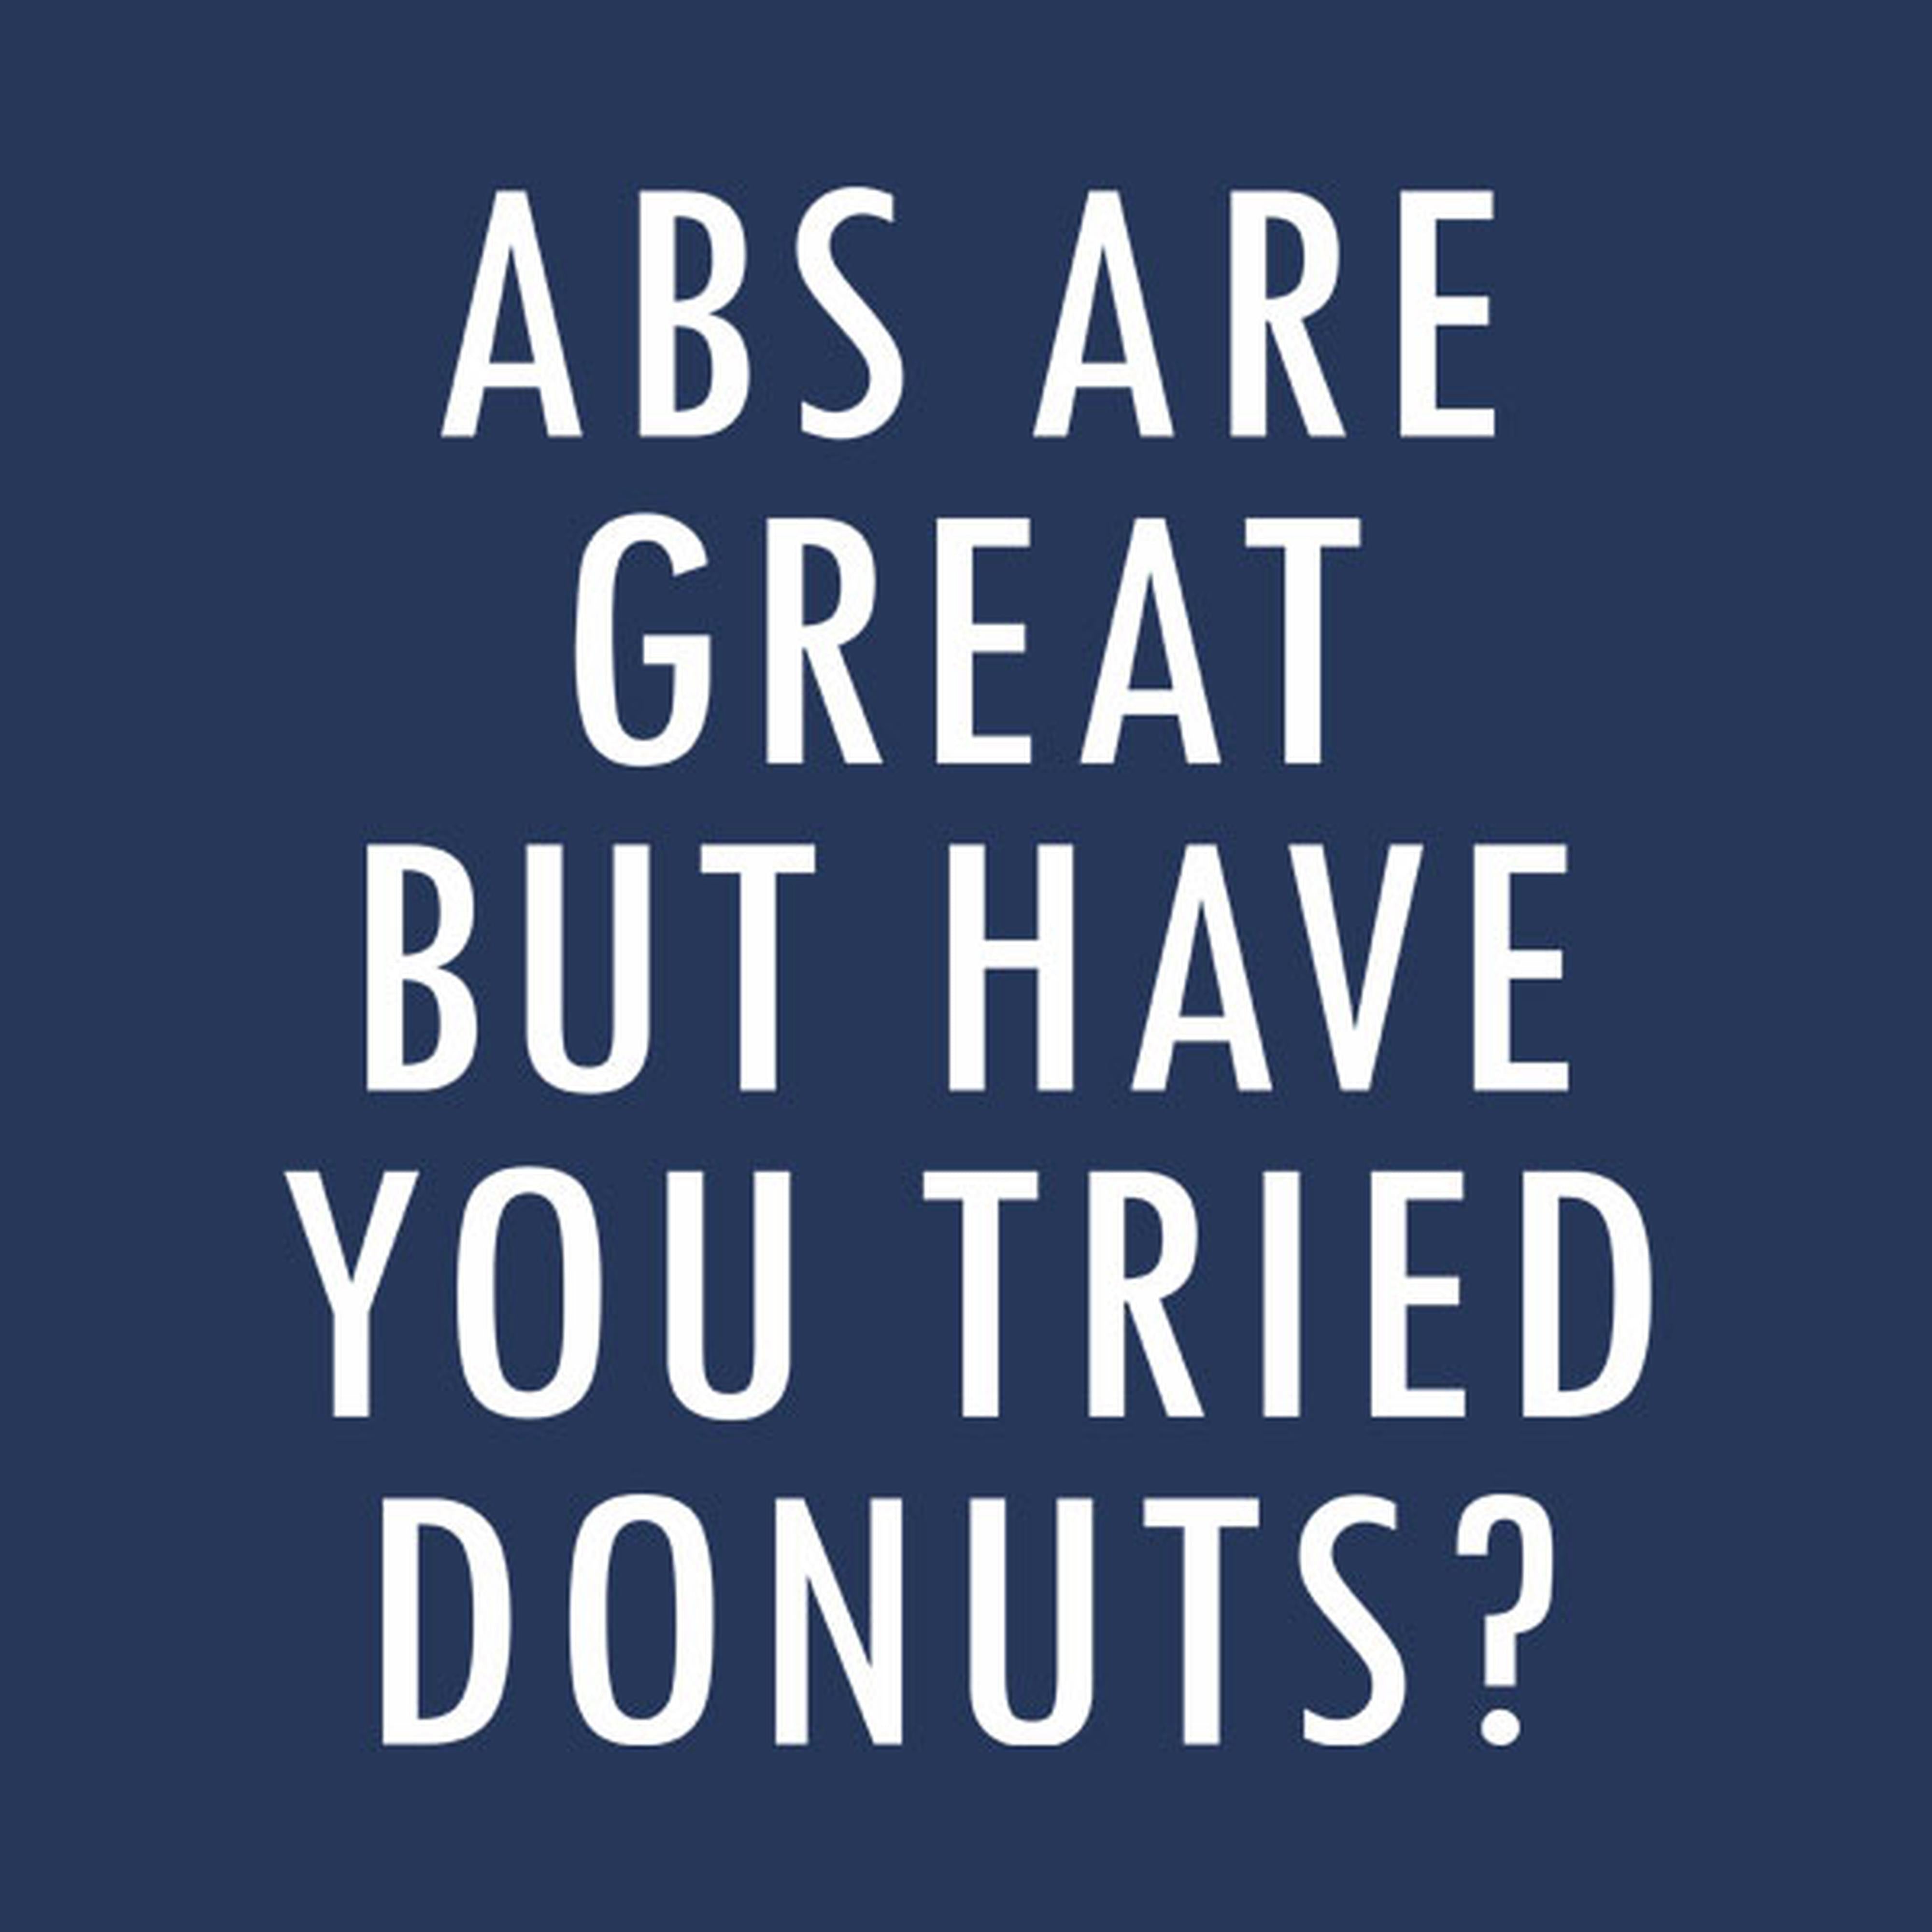 ABS are great but have you tried donuts? - T-shirt